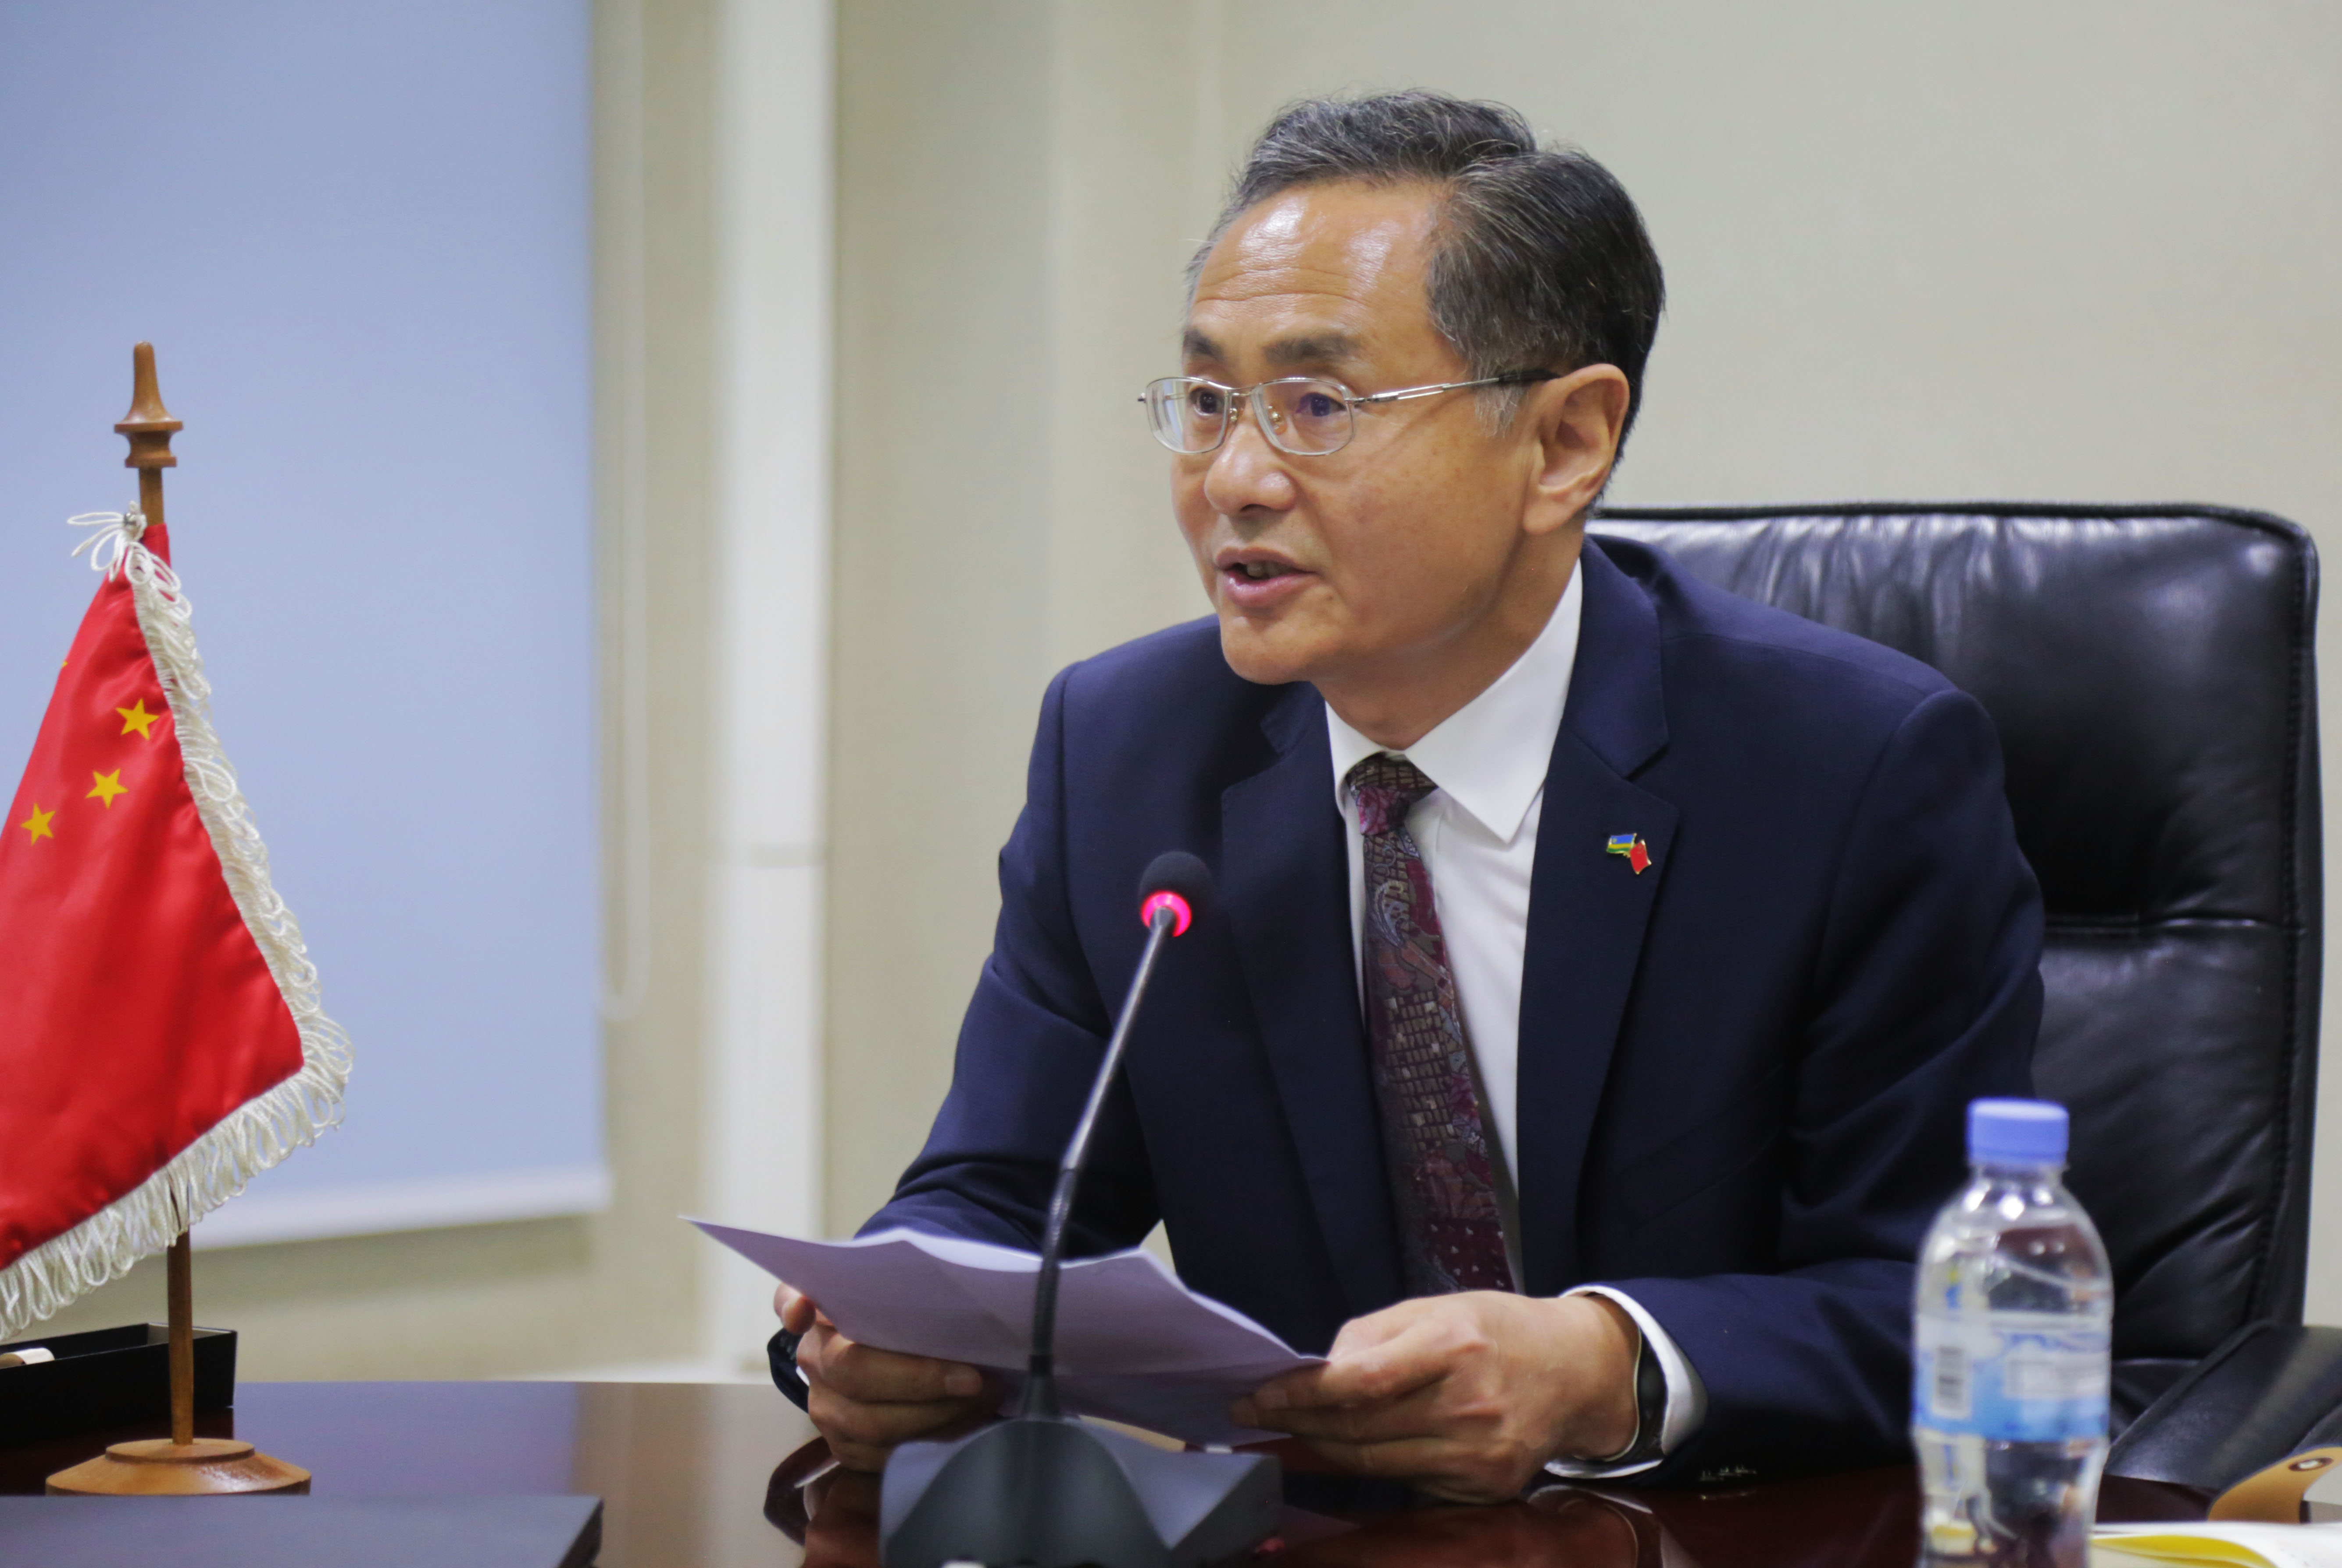 Amb. Rao Hongwei, the outgoing Chinese envoy to Rwanda, speaks during a news conference on June 18, 2019. He leaves next month, having served in Rwanda since 2017. During his tenure, Rao witnessed a number of key developments, including President Xi Jin Pingu2019s historic visit to Rwanda, as well as some unfortunate events like the Covid-19 outbreak. Photo: Sam Ngendahimana.